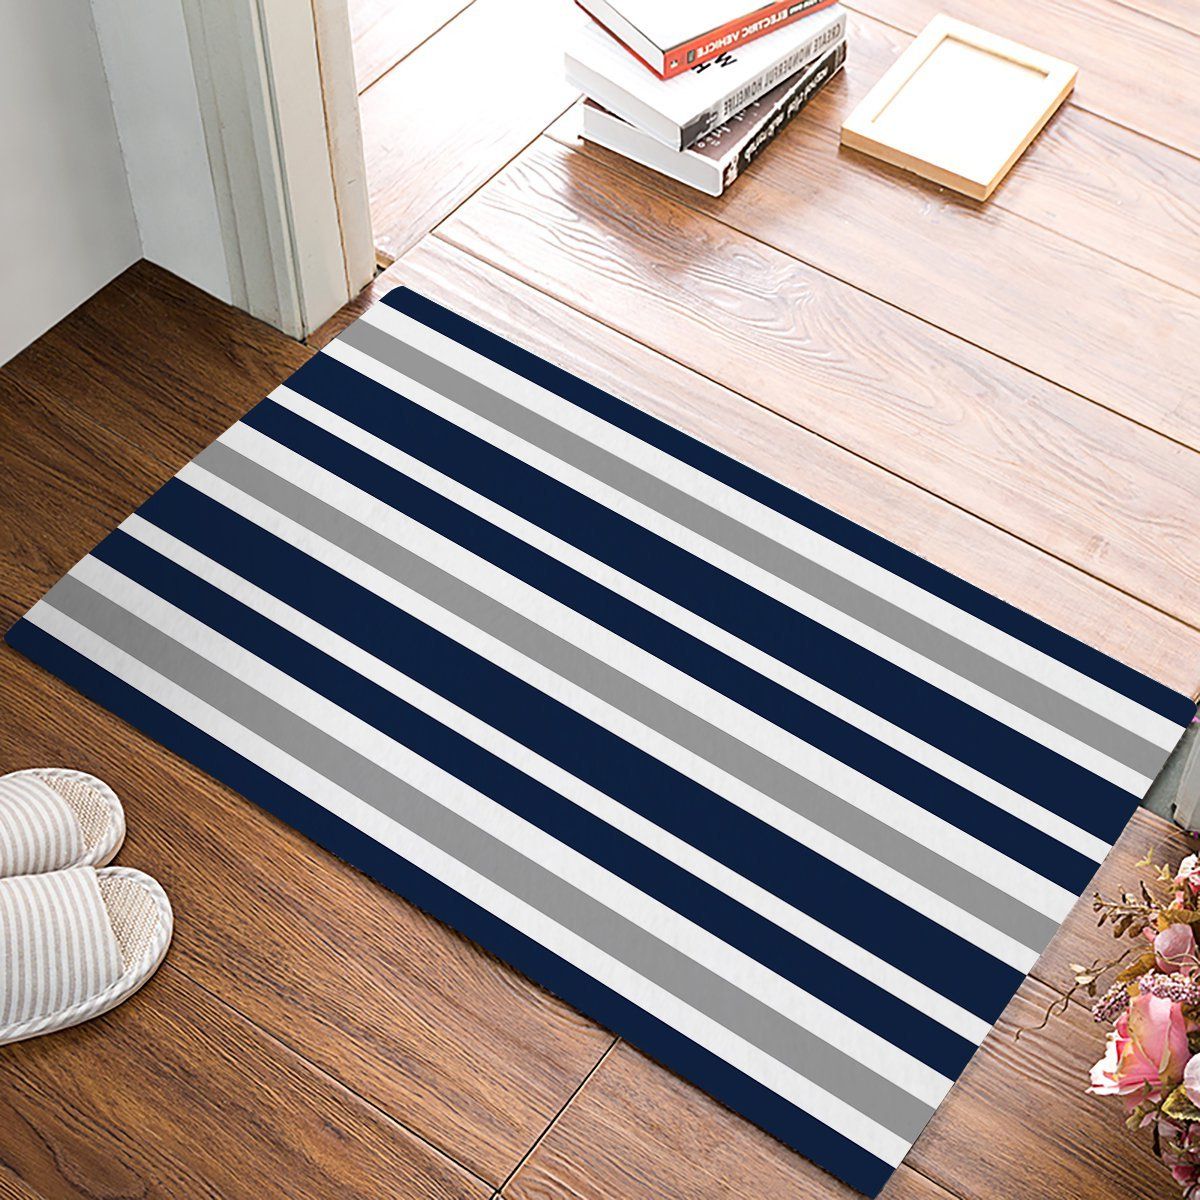 Widely Used Cheap Navy Blue Bath Rugs, Find Navy Blue Bath Rugs Deals On Line At Within Navy Blue And White Striped Ottomans (View 7 of 10)